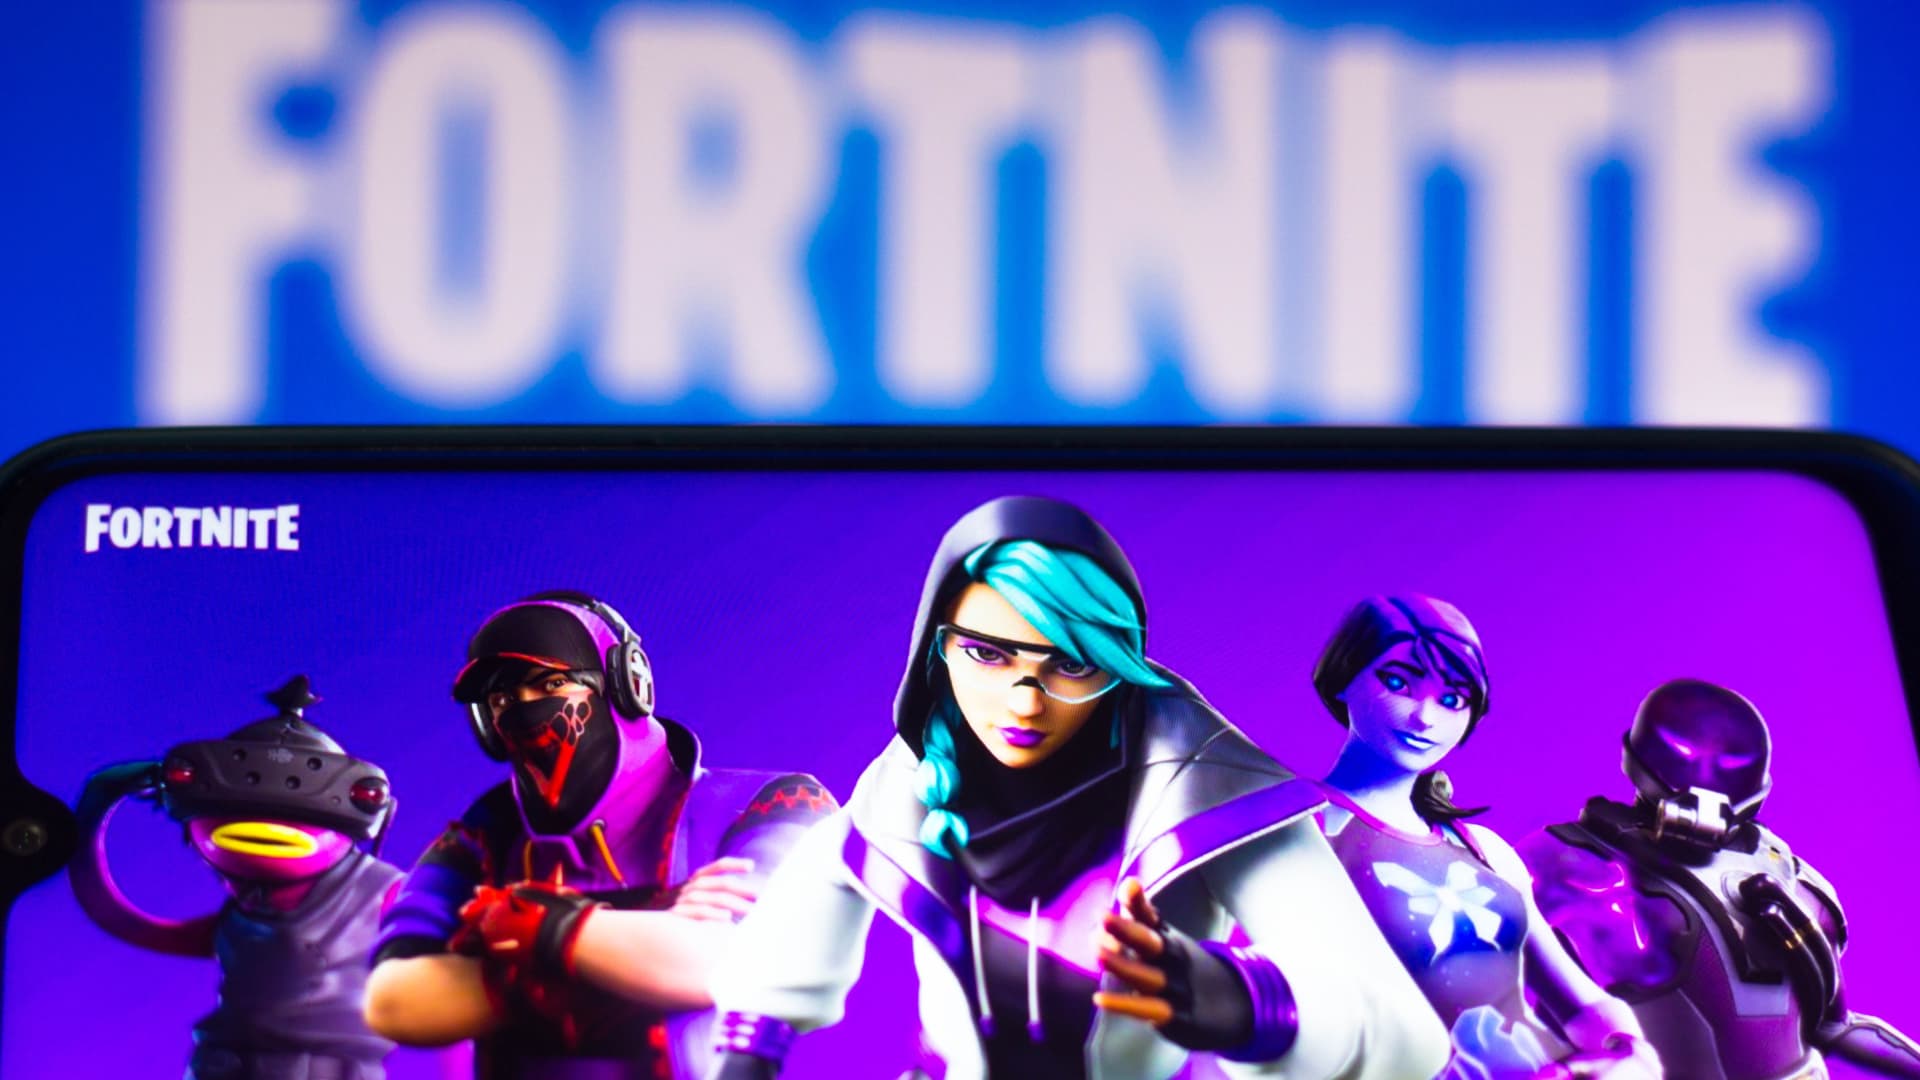 How to get your share of the $245 million Fortnite settlement